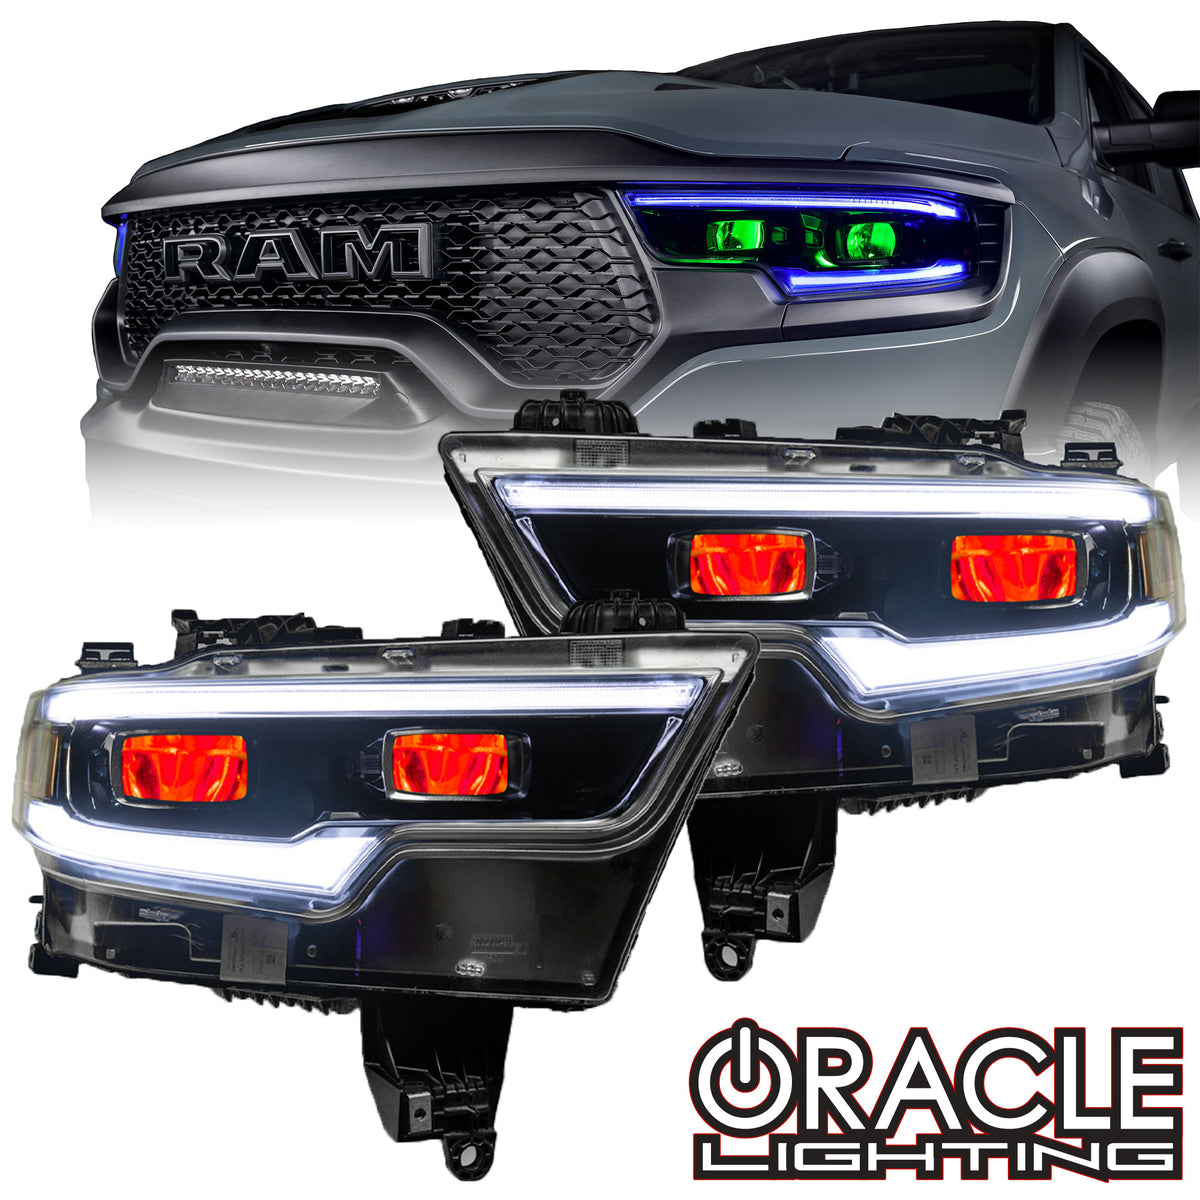 www.oraclelights.com